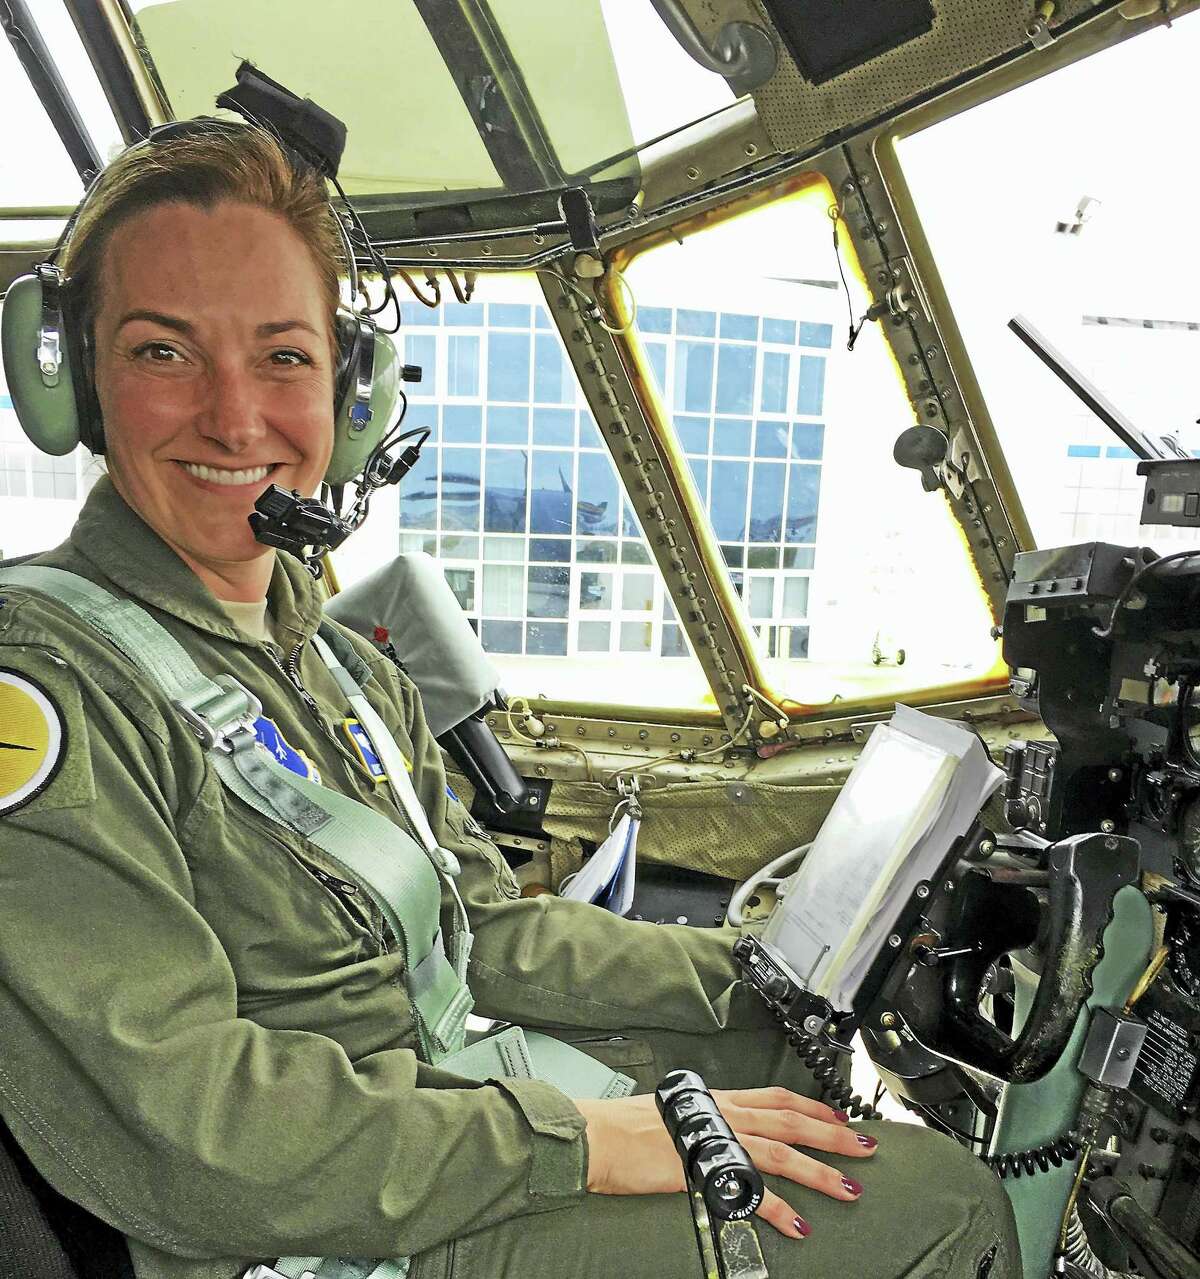 Let. Col. Kristen Snow will speak as a guest on March 11 at the New England Air Museum, during the Women Take Flight Day celebration and programs.